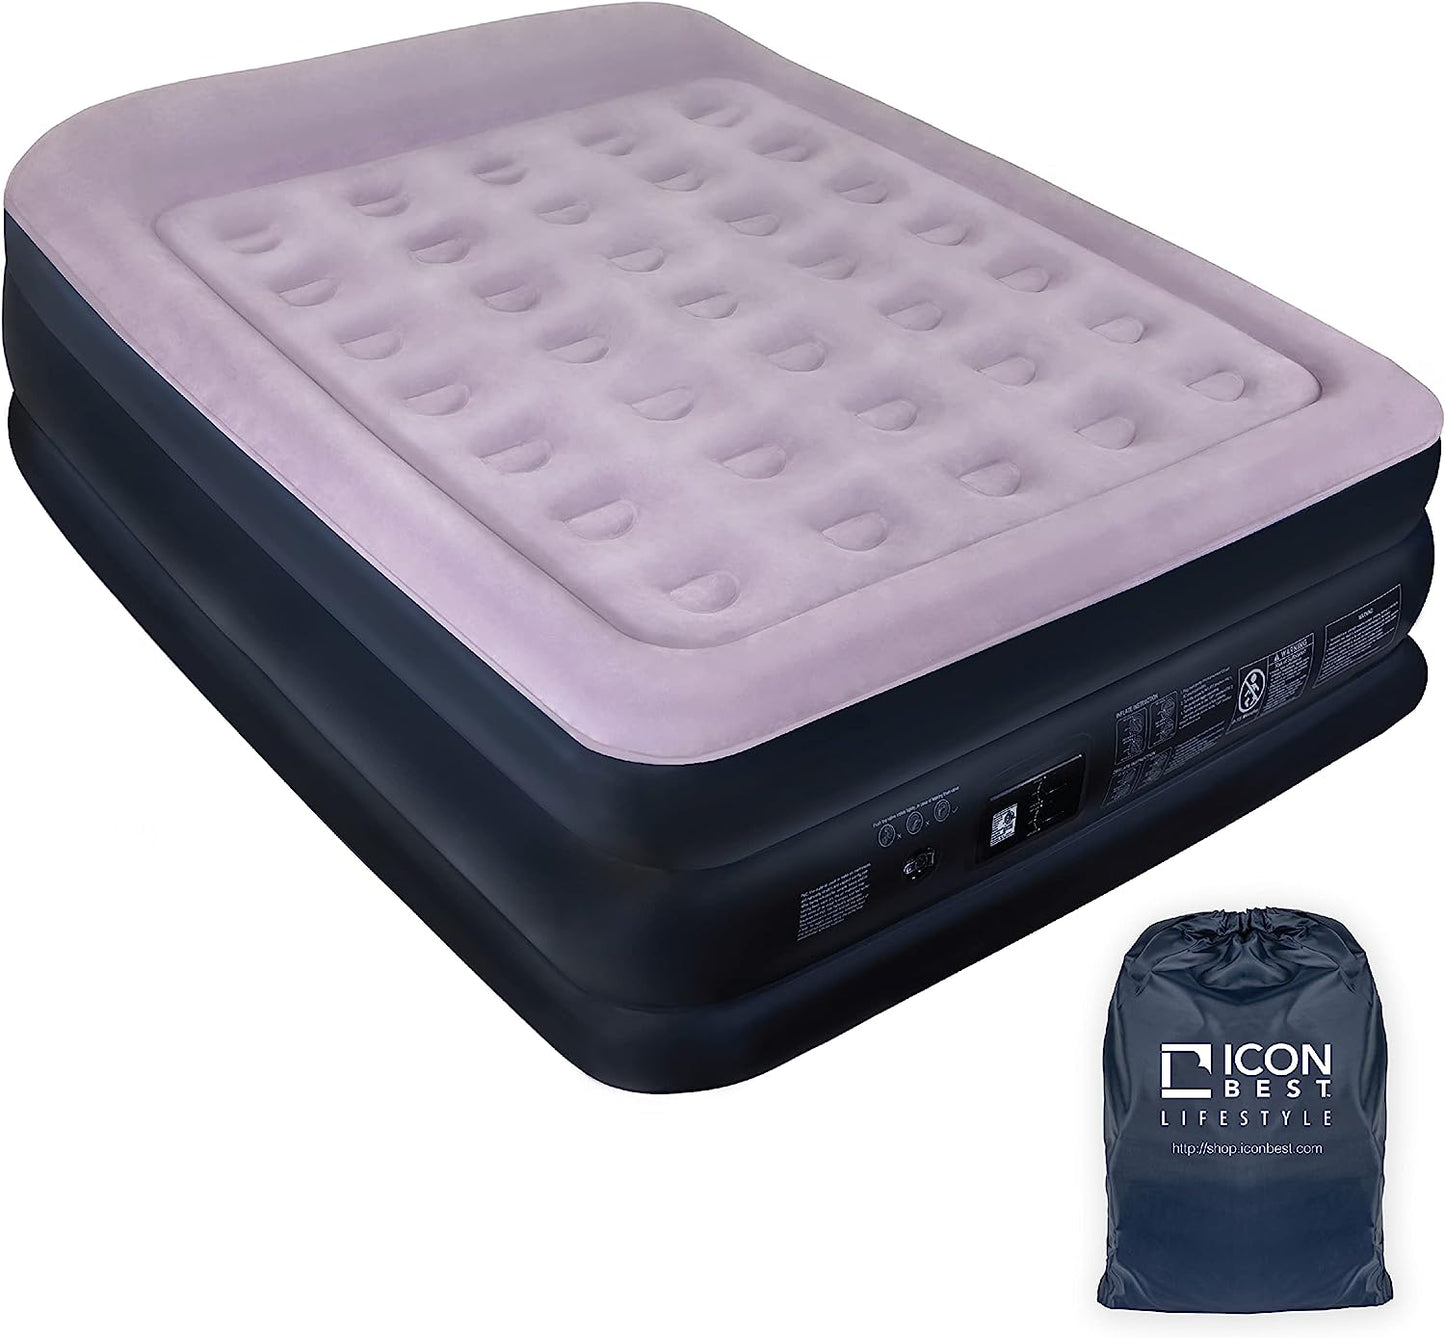 ICON BEST Double High Inflatable Airbed/ Air Mattress with Dual Pump and Pillow,